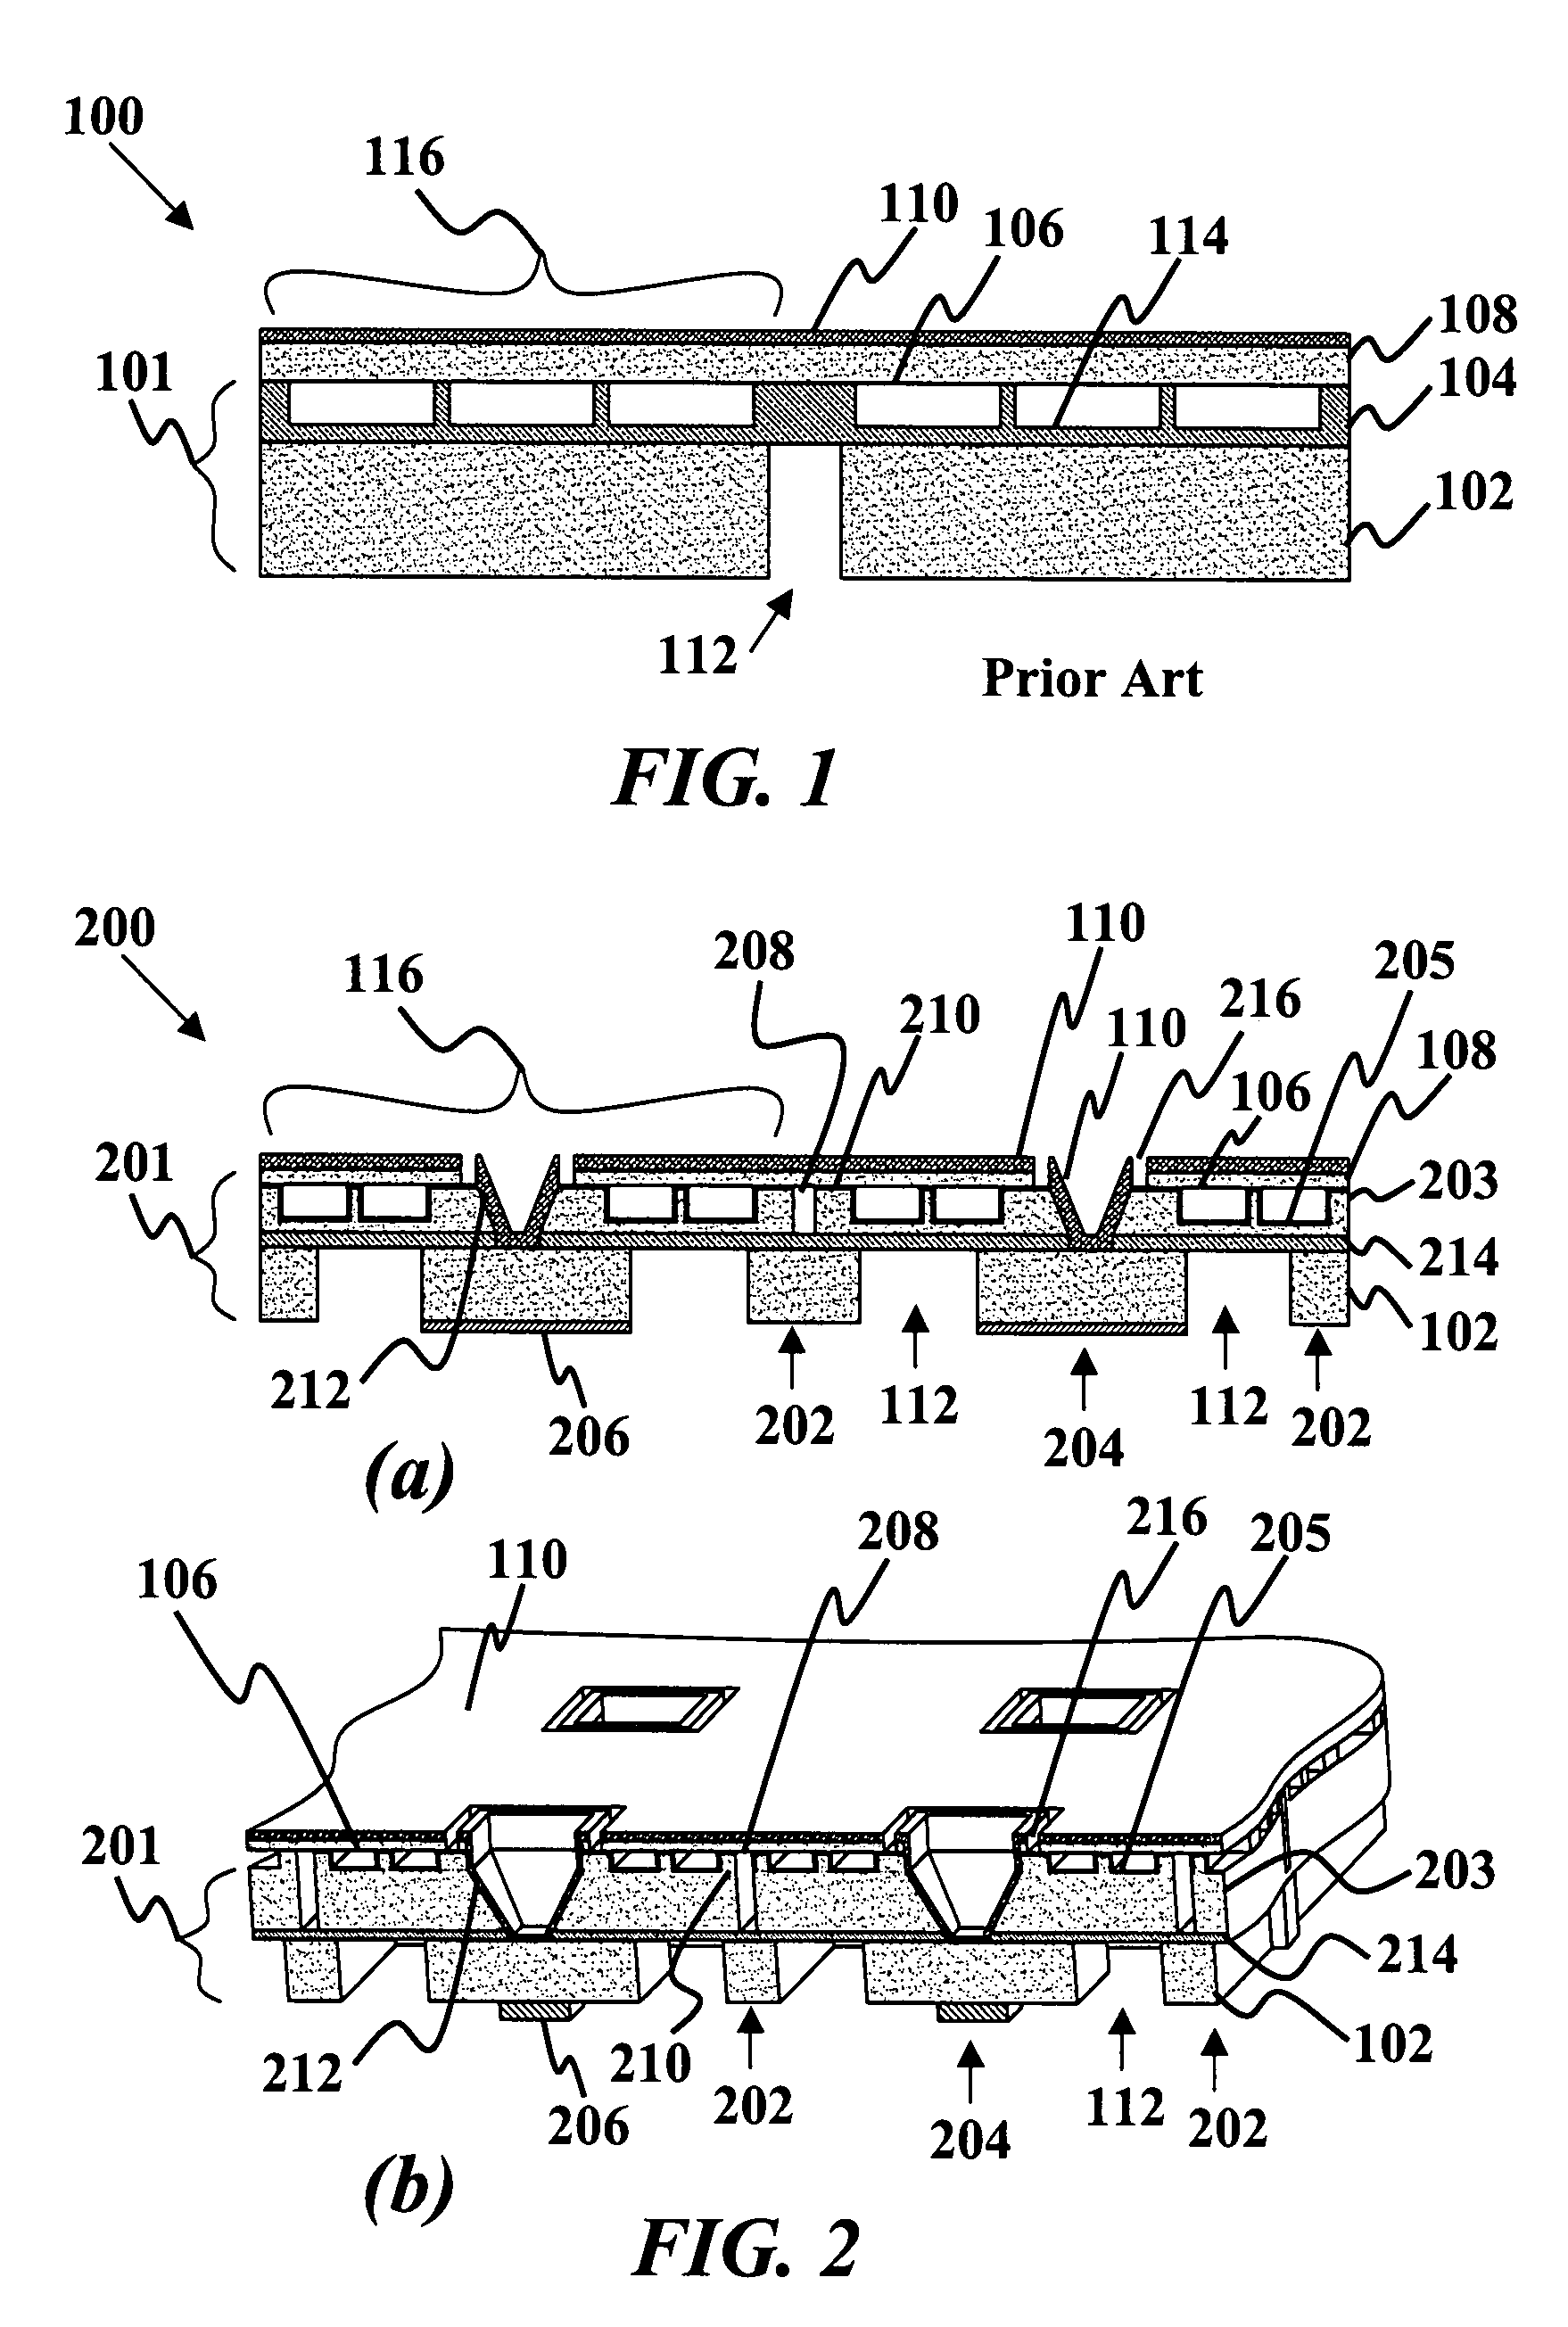 Trench isolated capacitive micromachined ultrasonic transducer arrays with a supporting frame